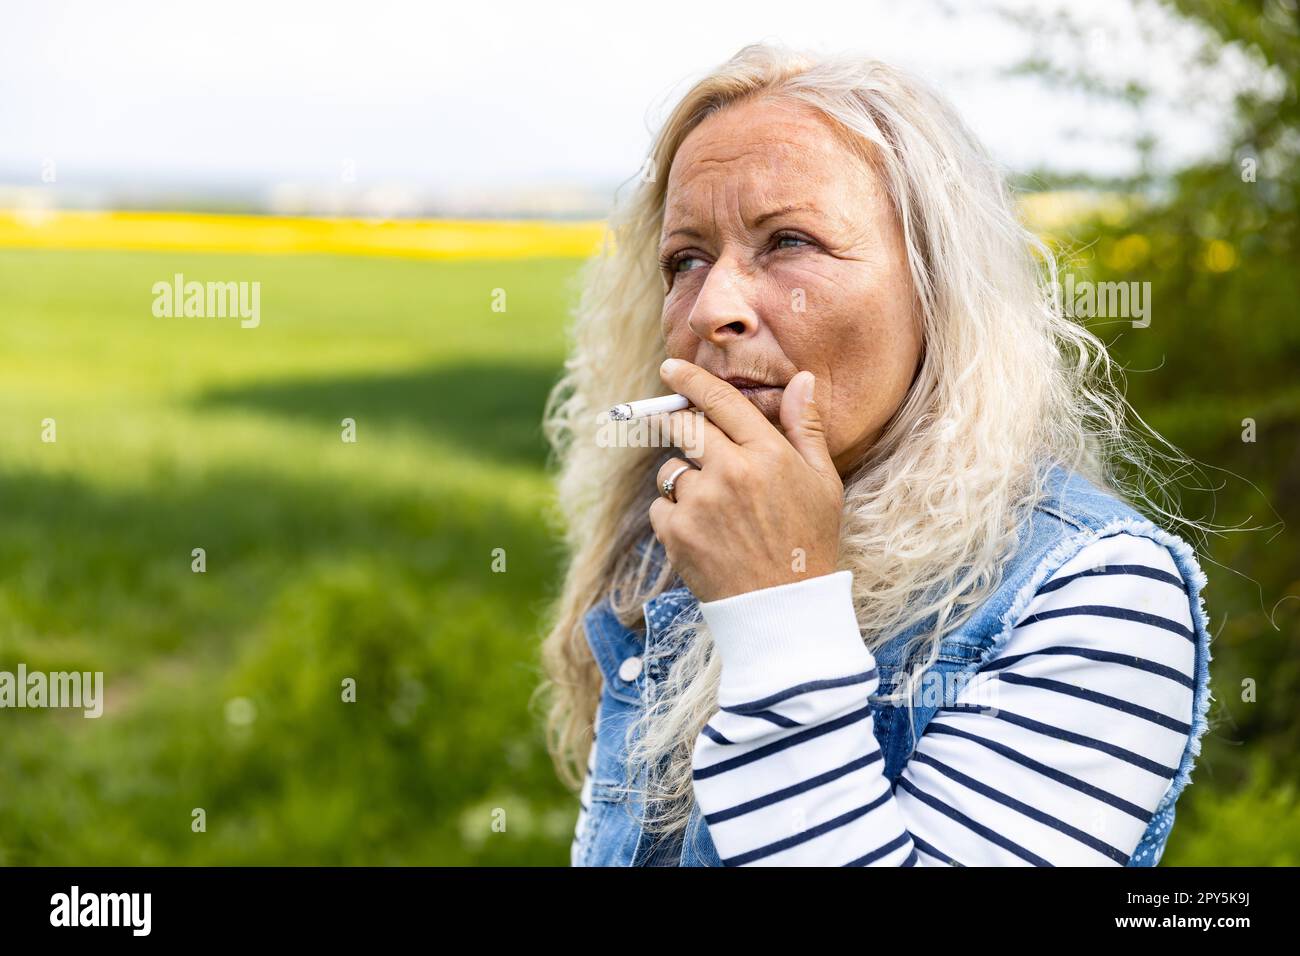 Portrait from a Lady smoking outdoor a cigarette. Stock Photo